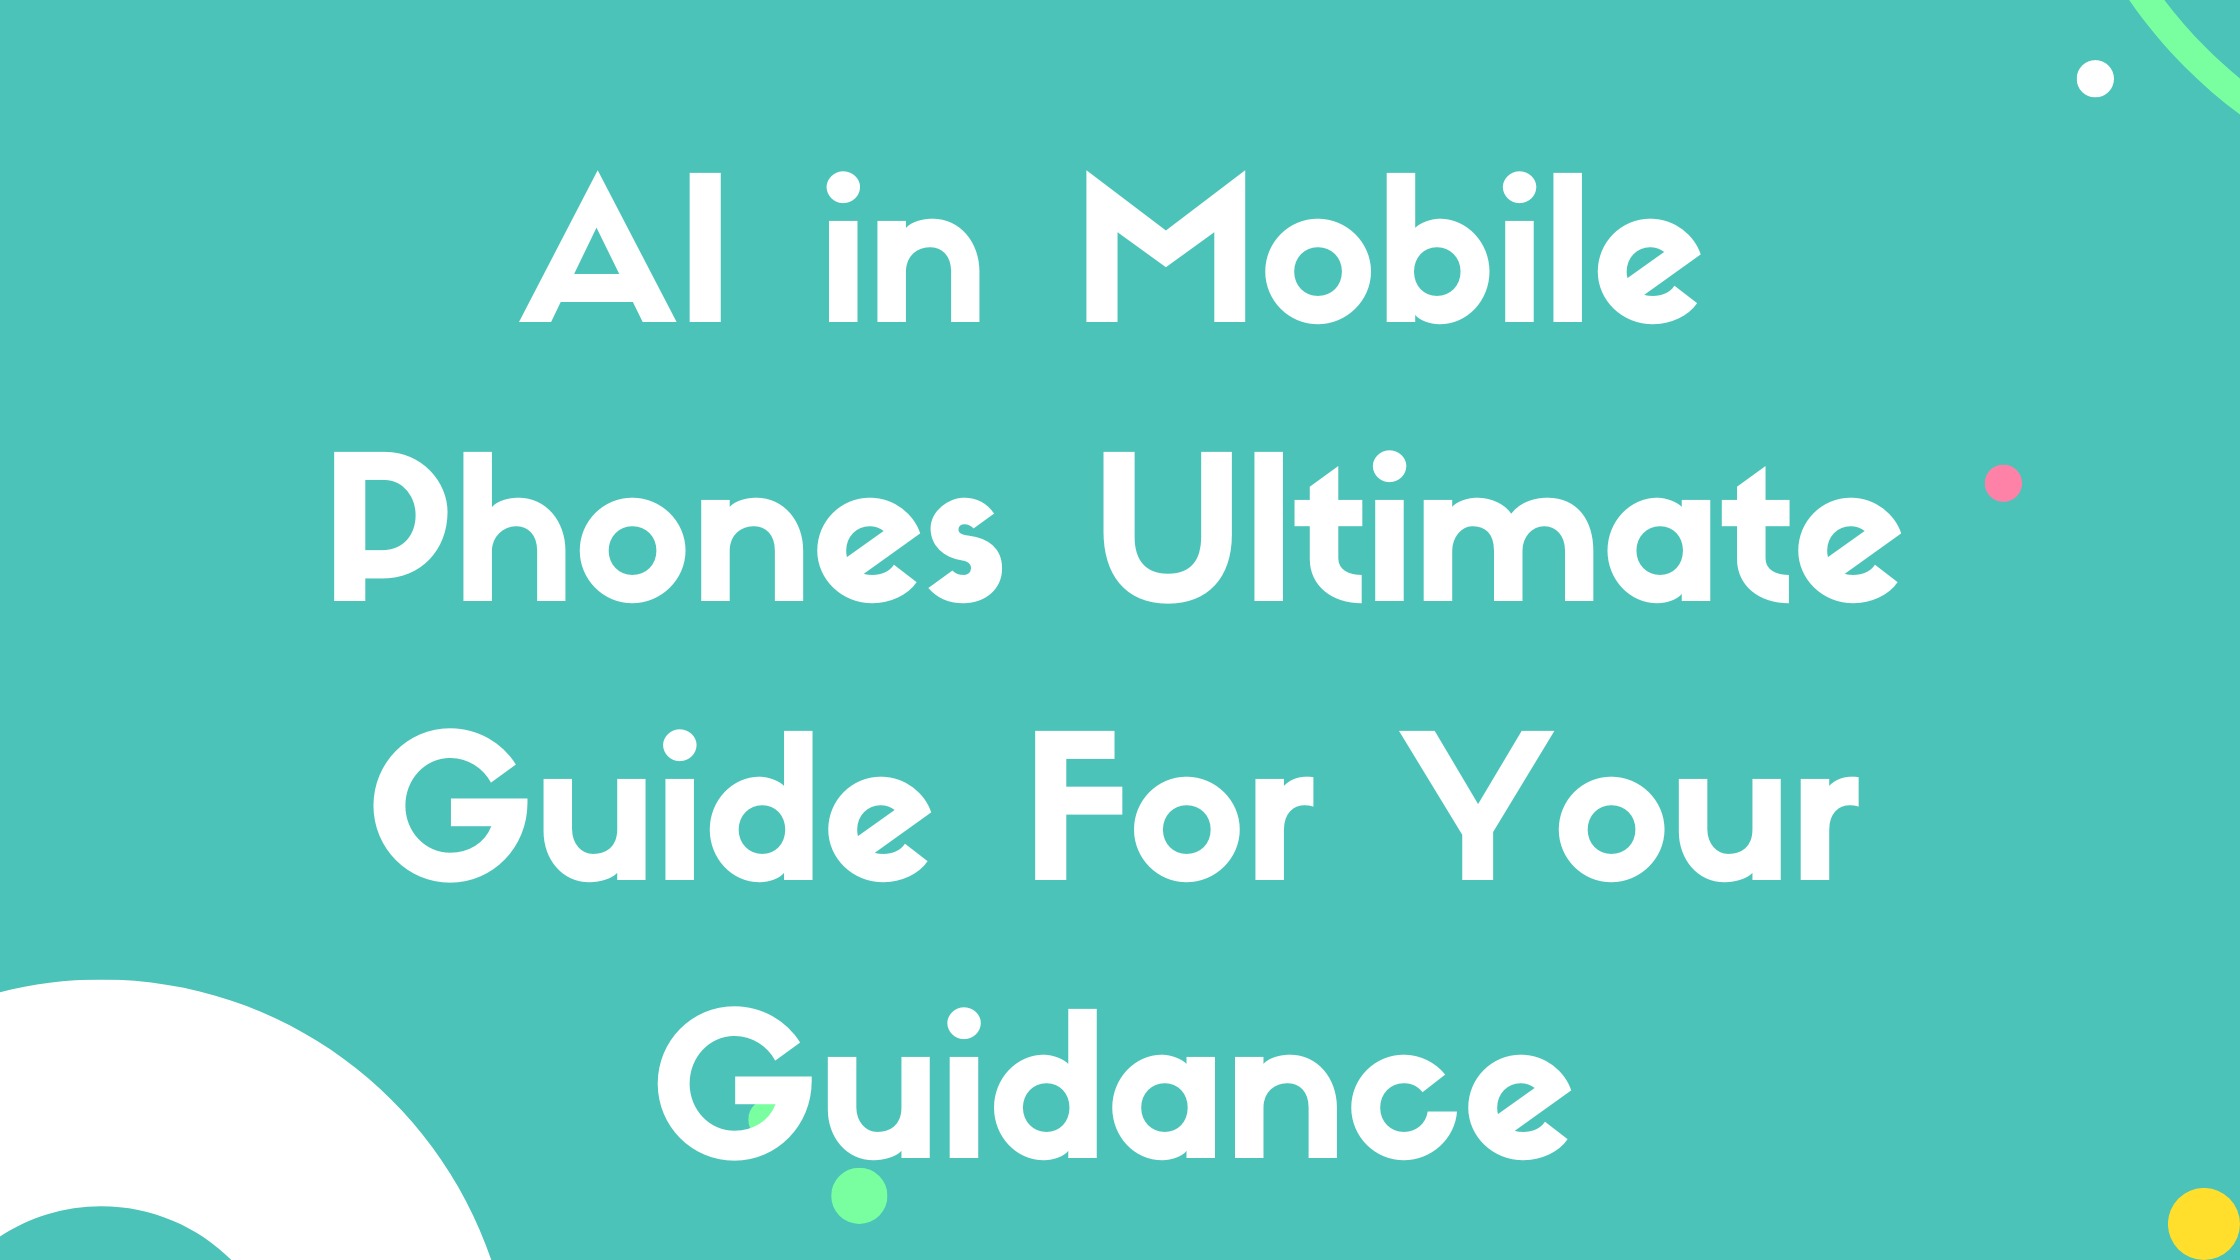 AI in Mobile Phones Ultimate Guide For Your Guidance